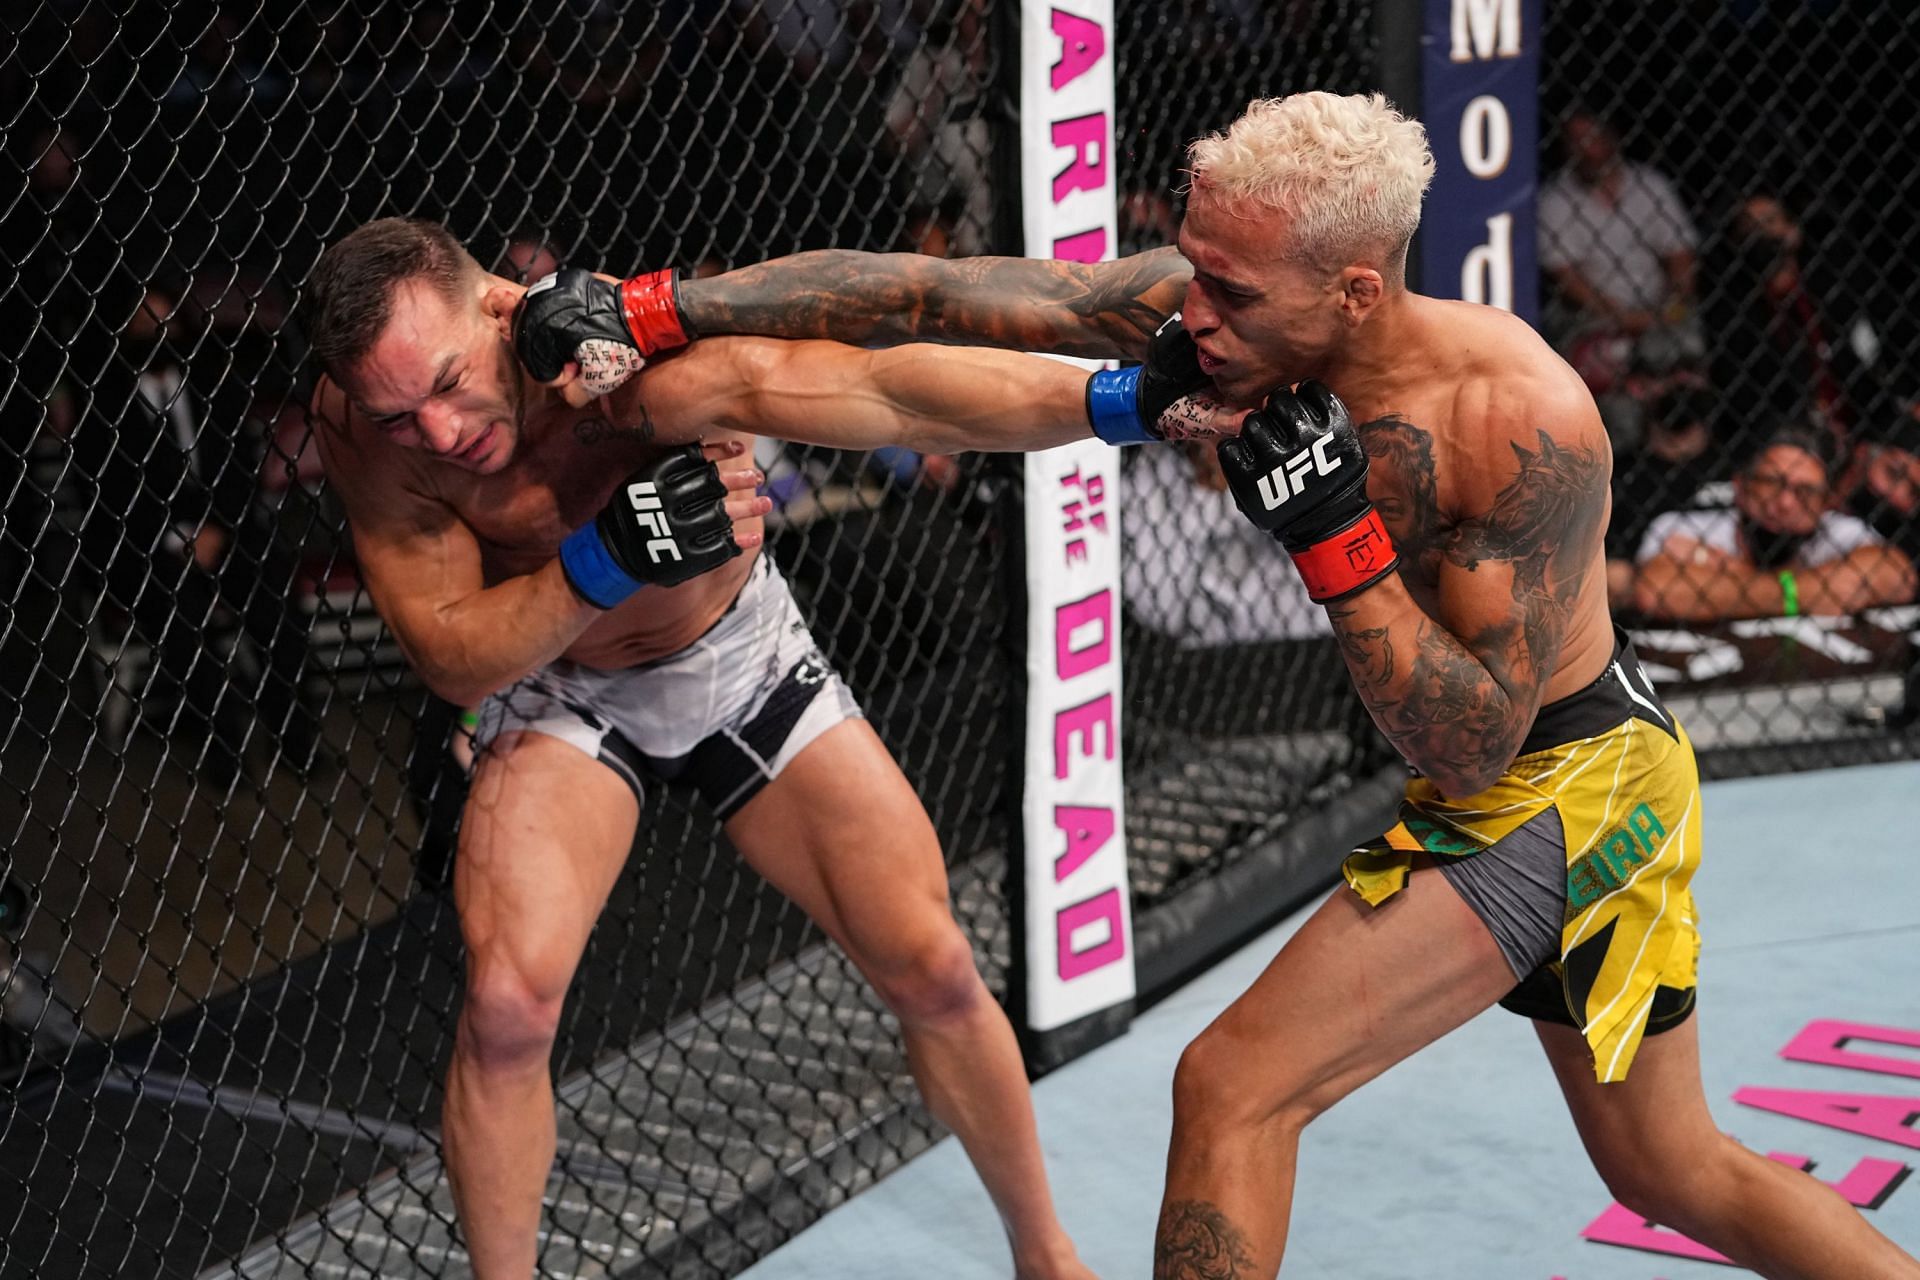 Charles Oliveira has developed an ever-more dangerous striking game in recent years